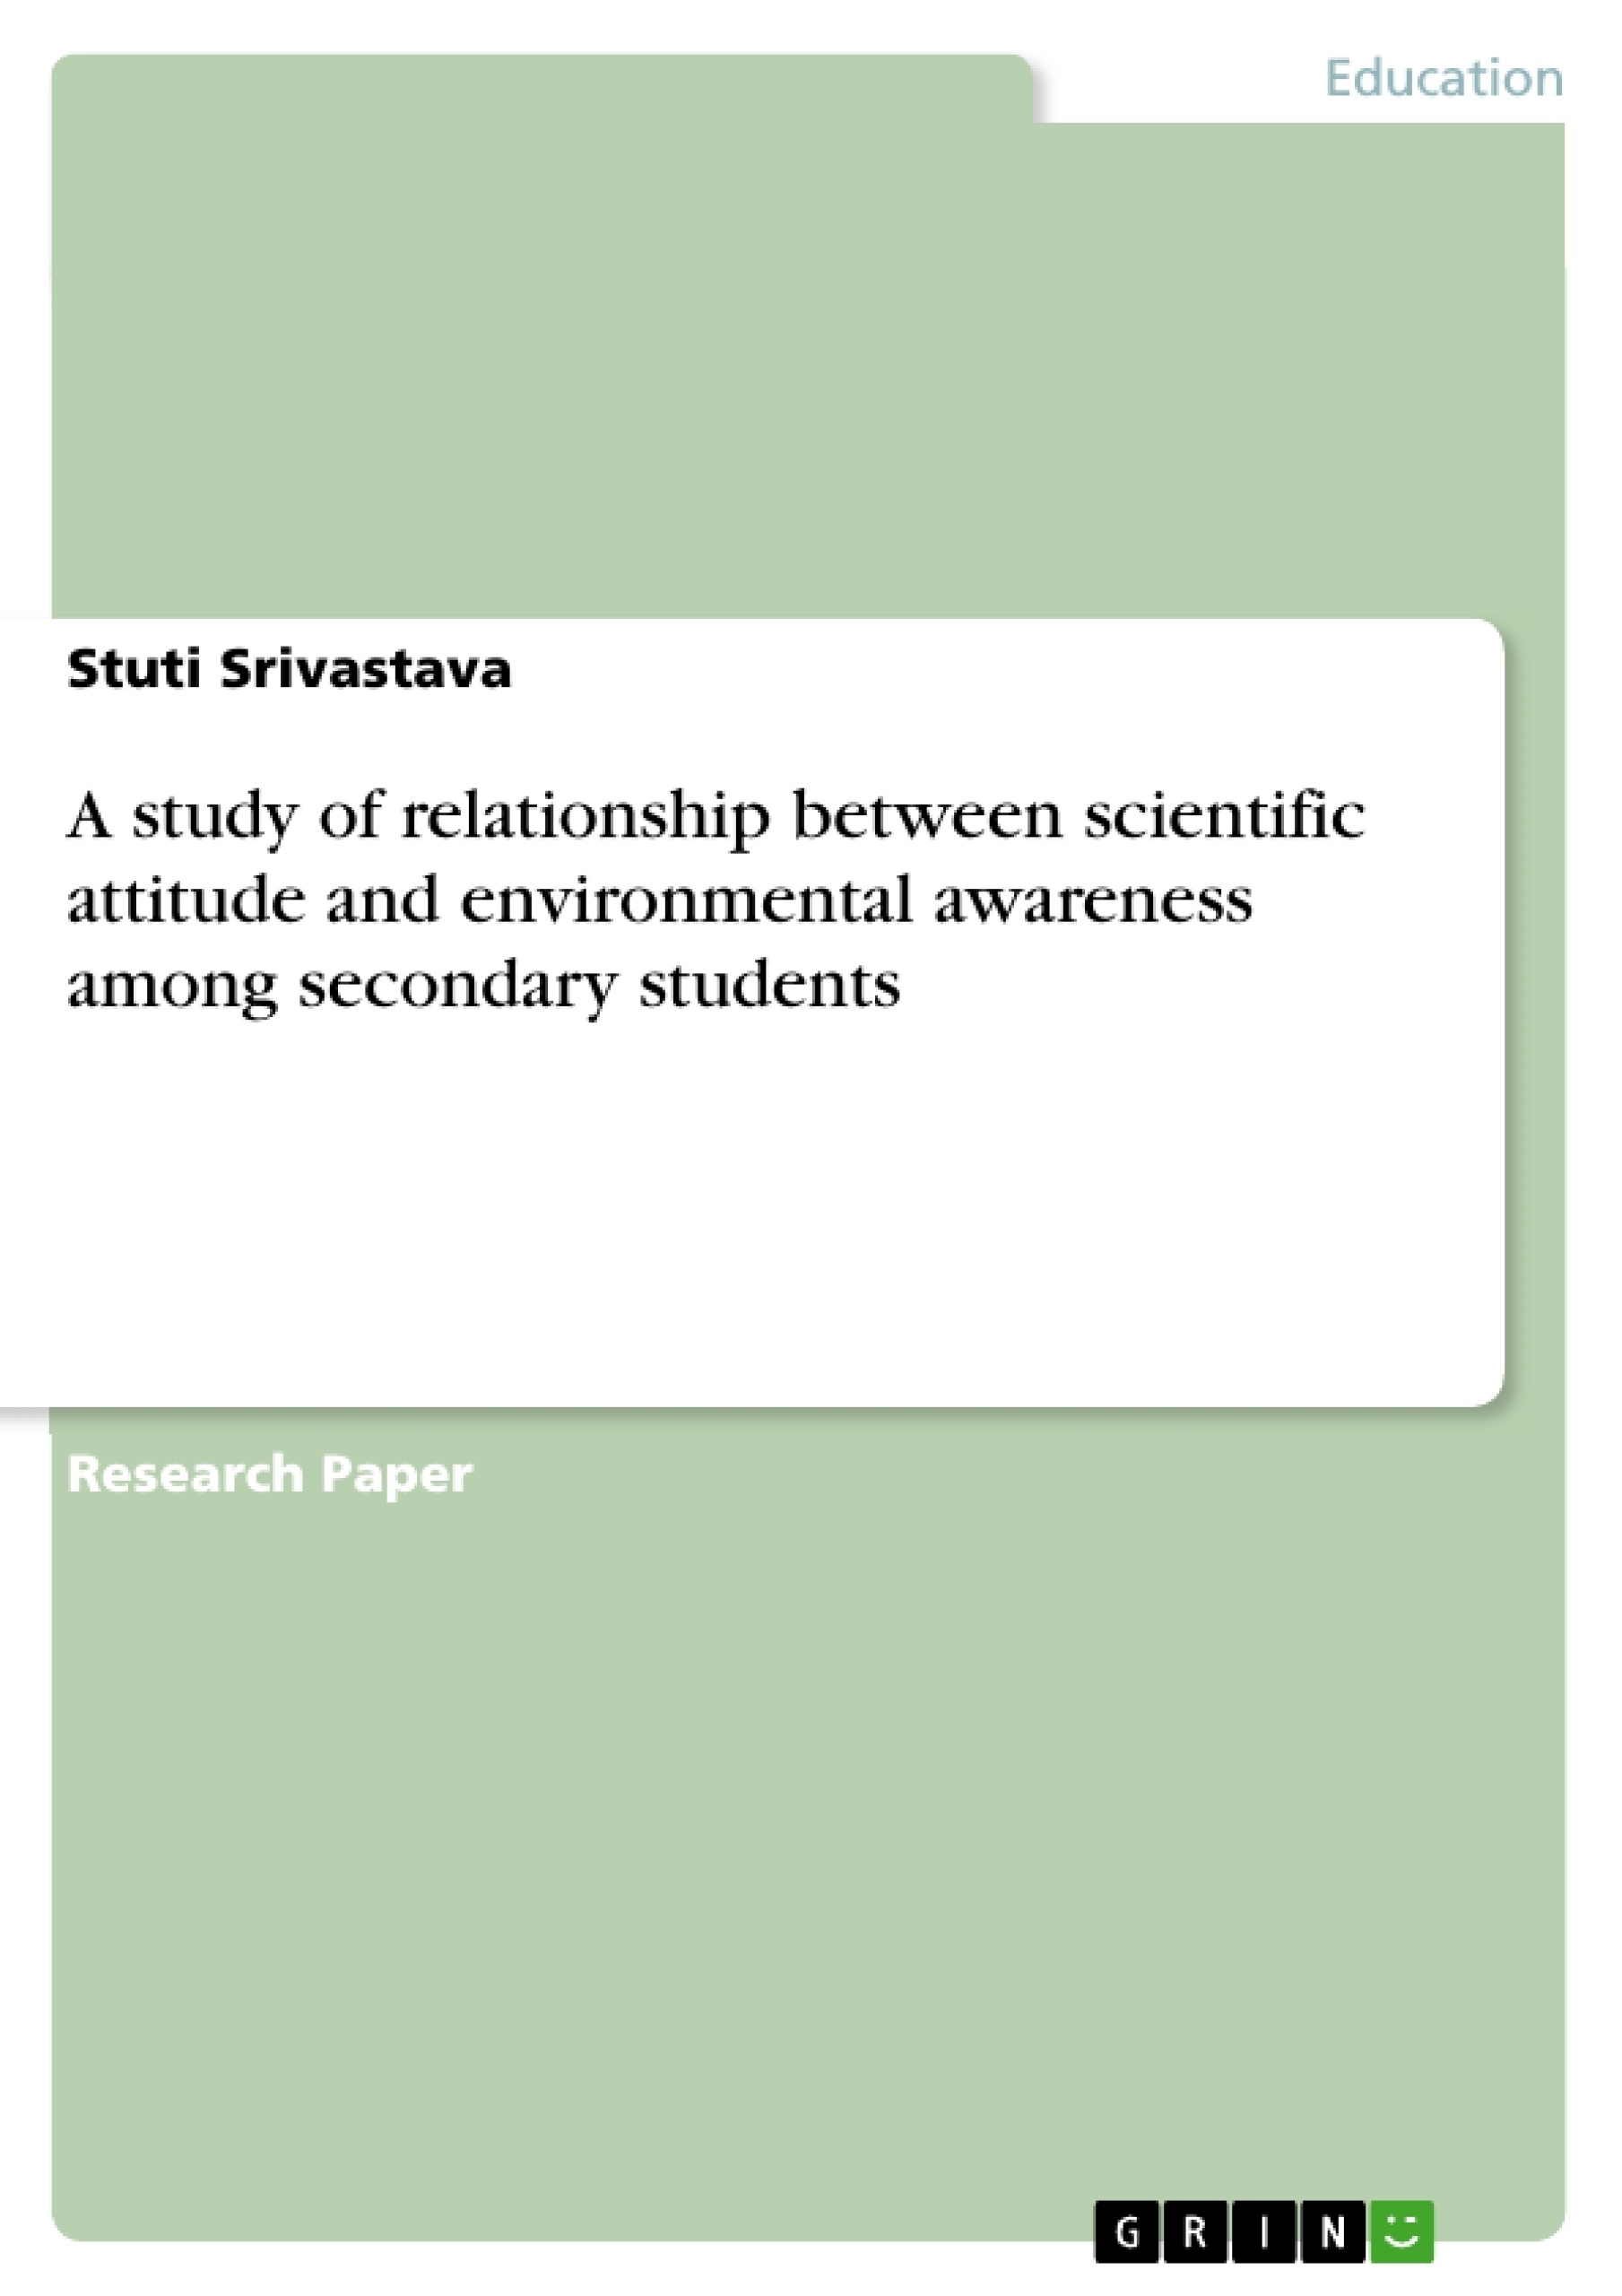 Titre: A study of relationship between scientific attitude and environmental awareness among secondary students